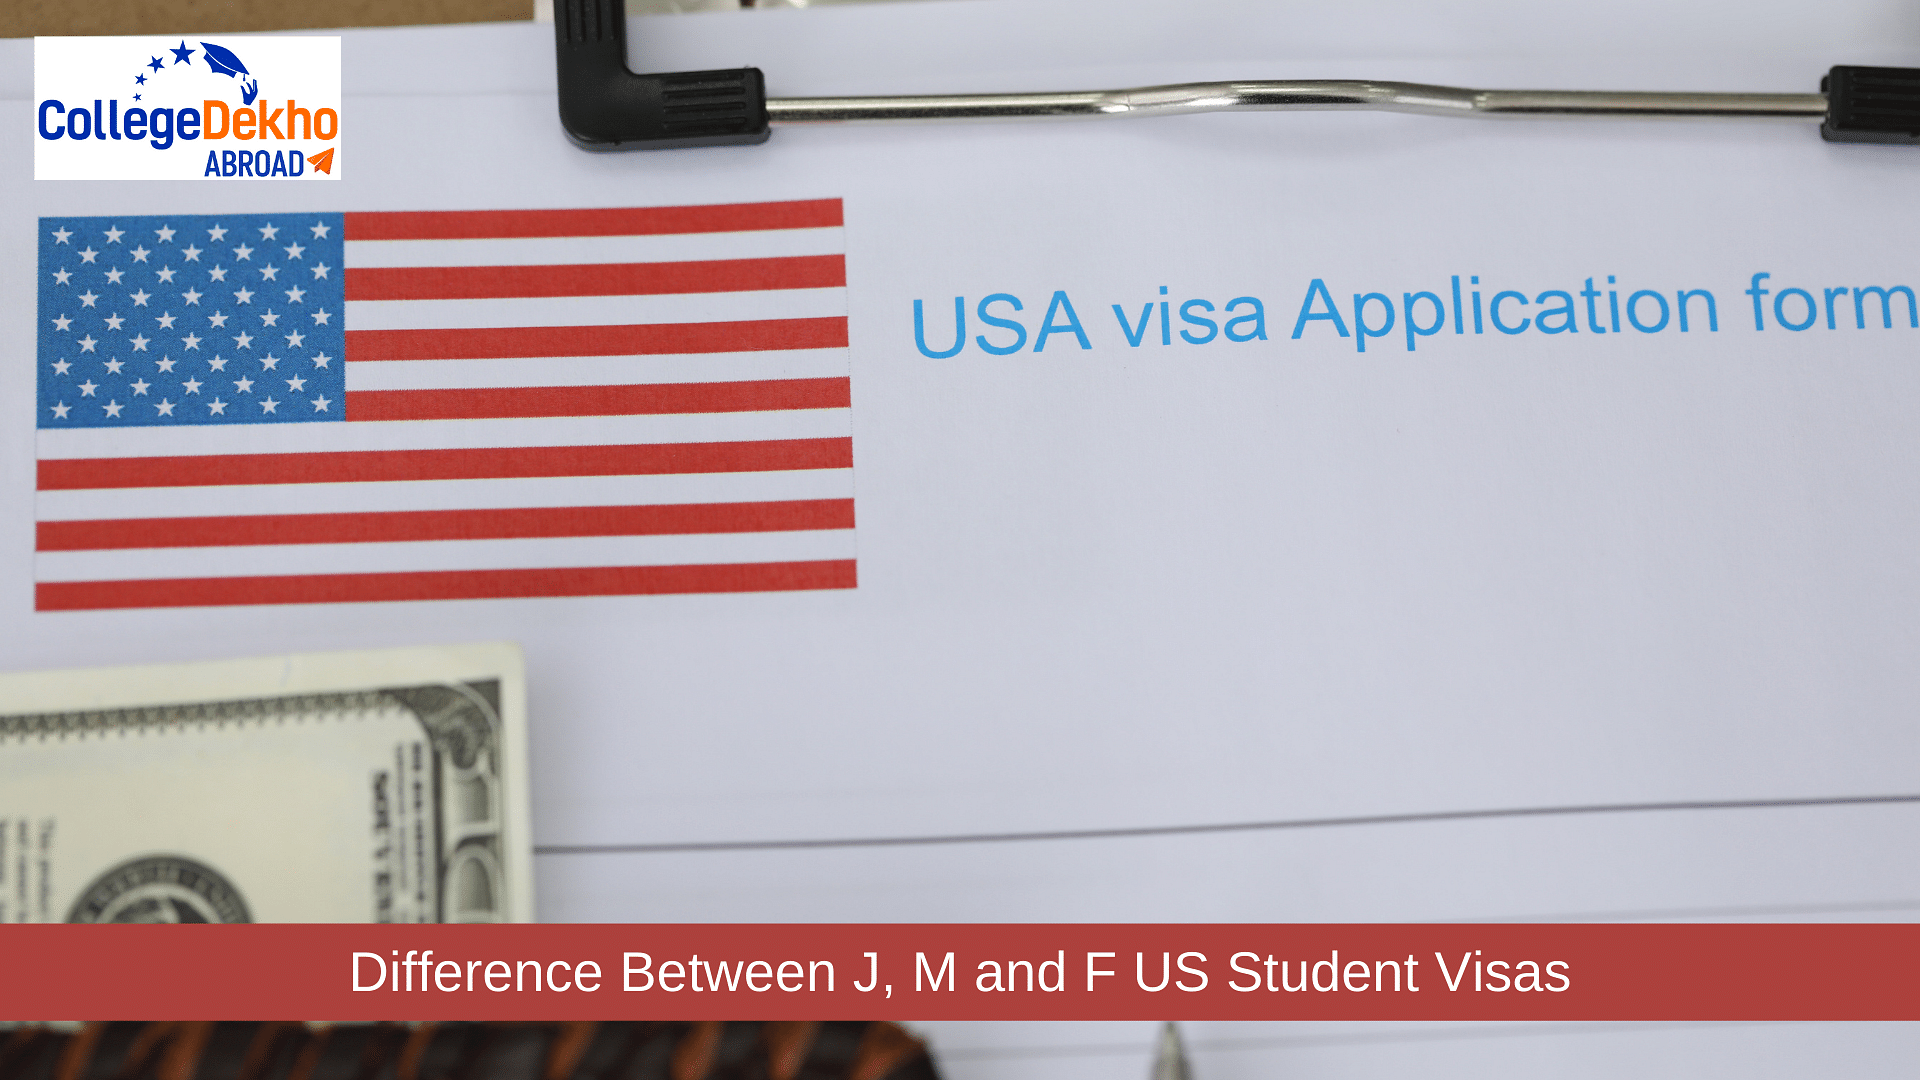 Differences Between J, M, and F US Student Visas